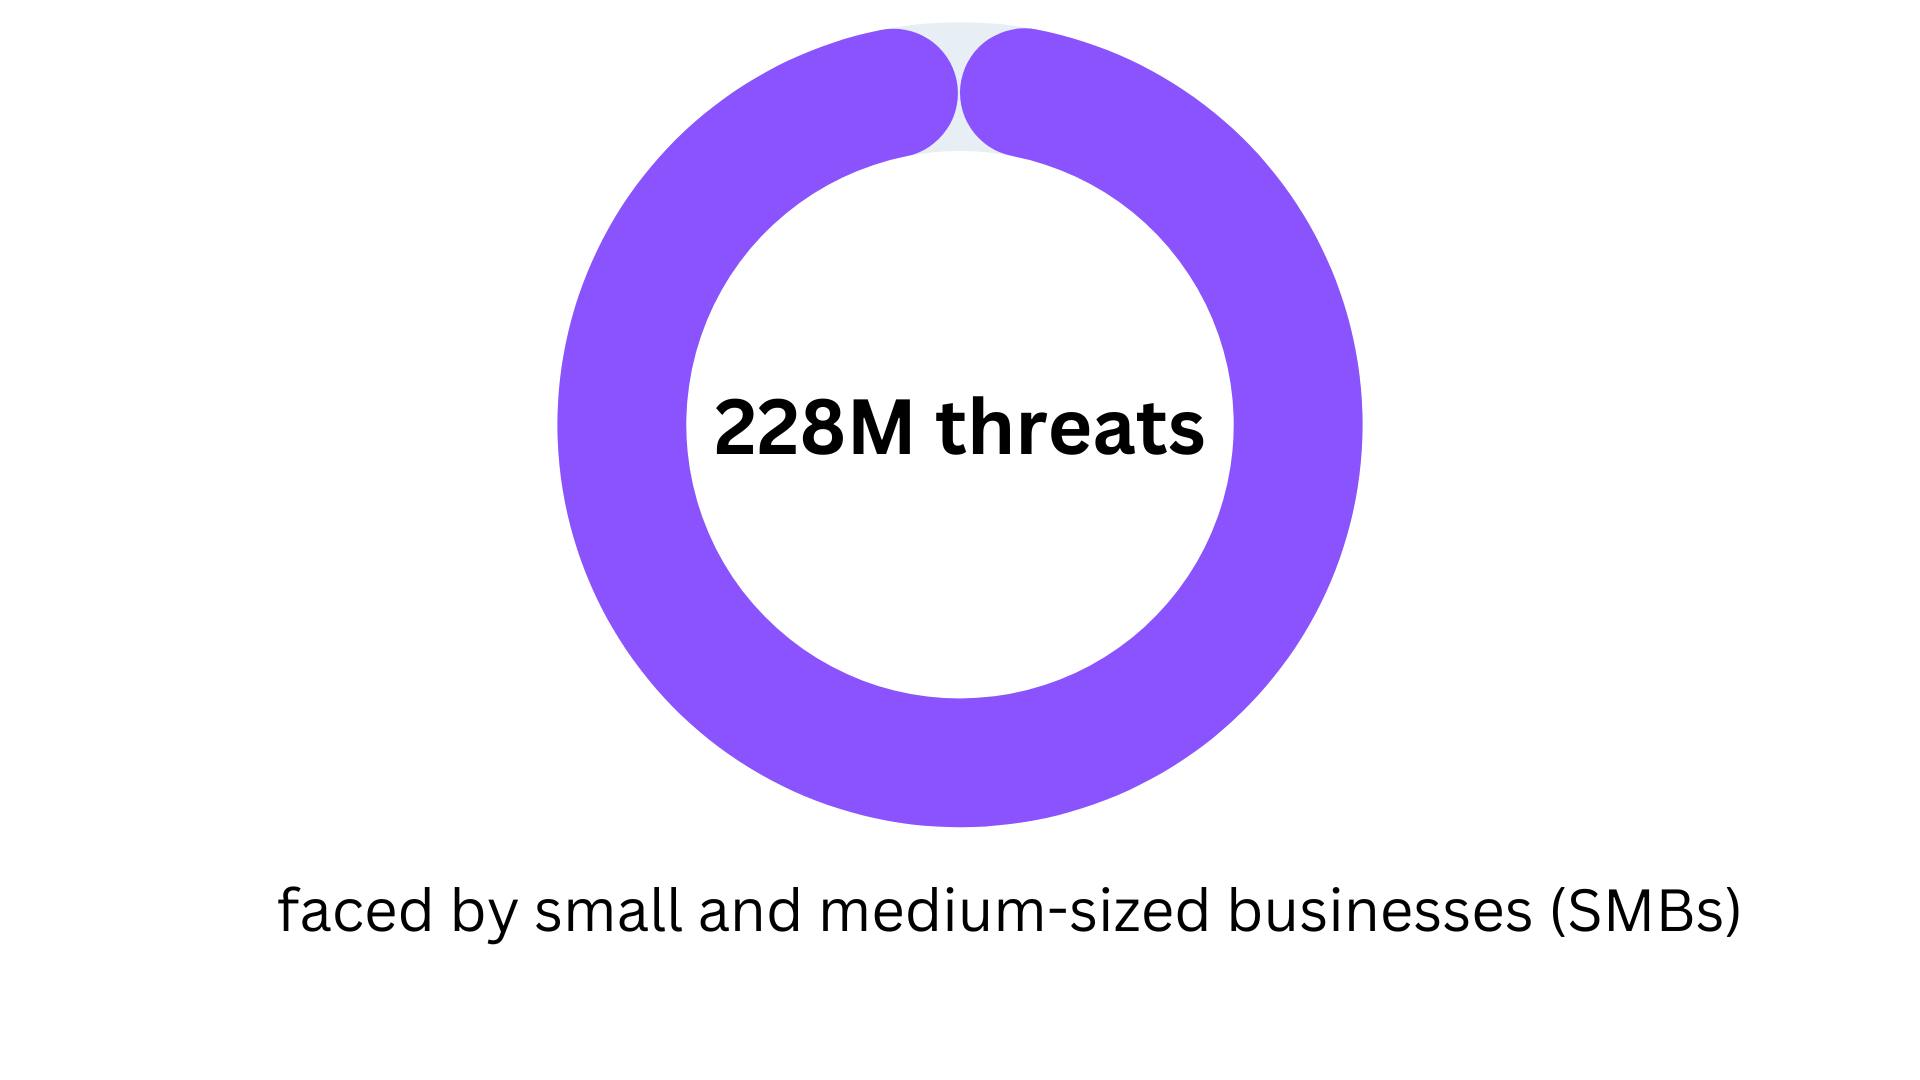 Cybersecurity Statistics - SMBs vulnerability to ongoing security risks